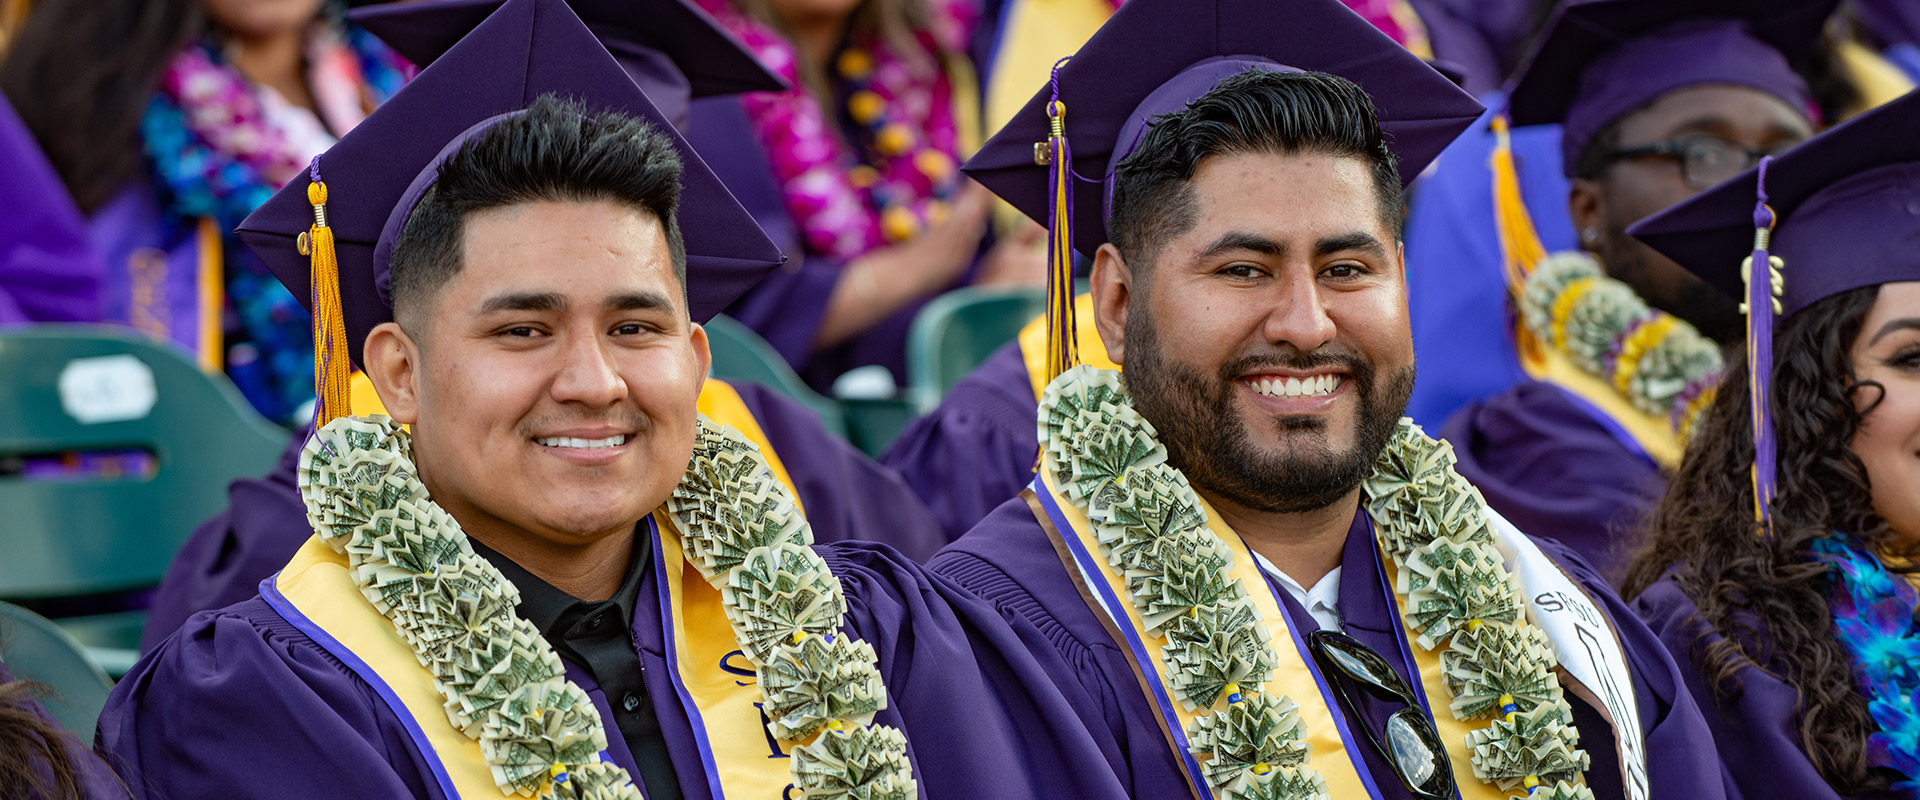 Business graduates wearing money leis and regalia at Commencement